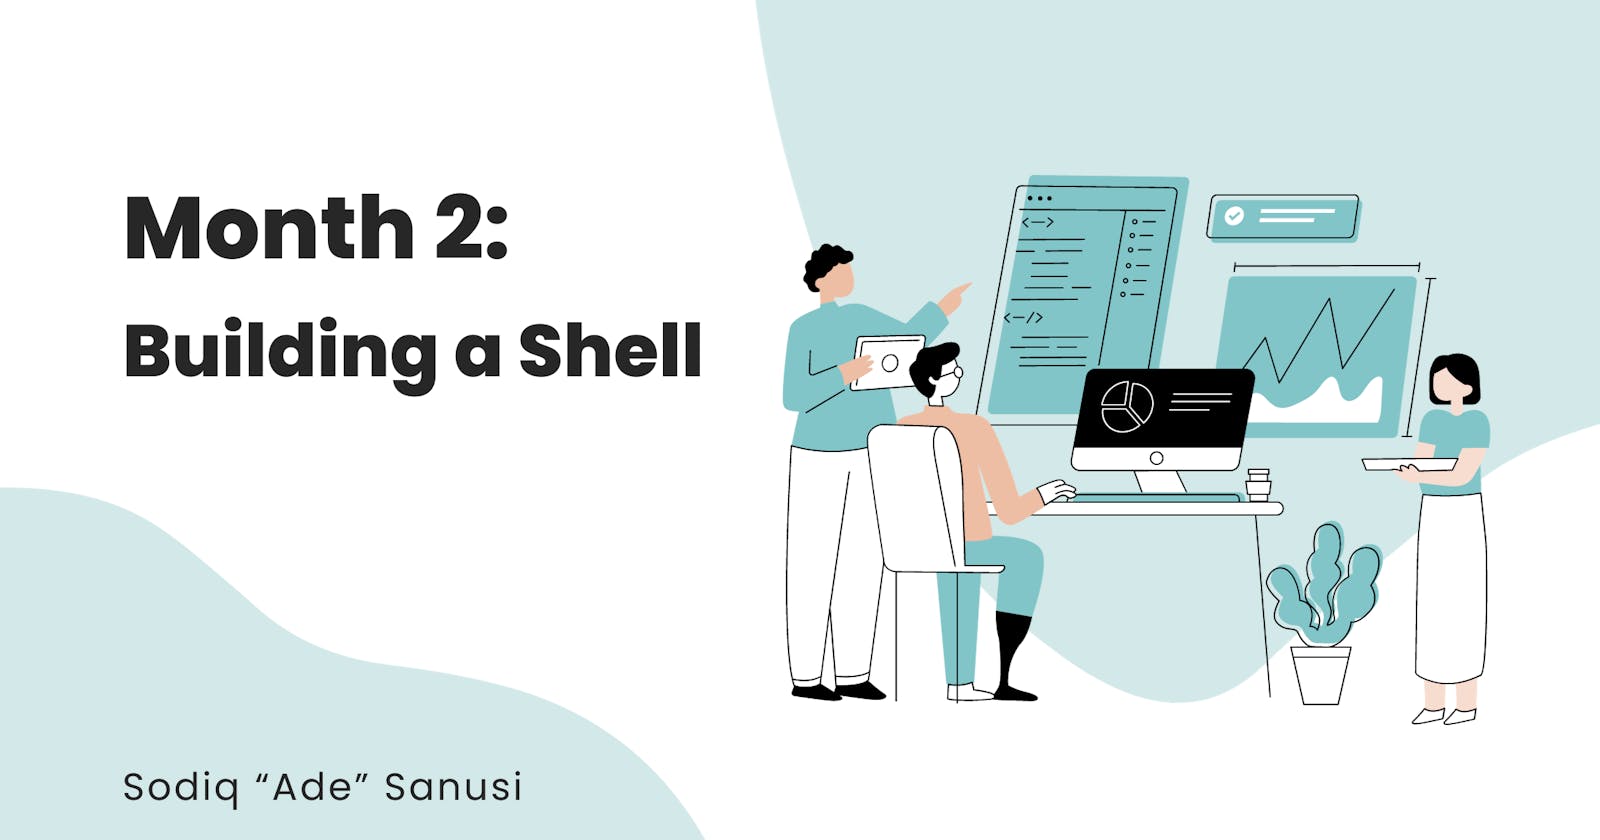 Month 2, Building a Shell